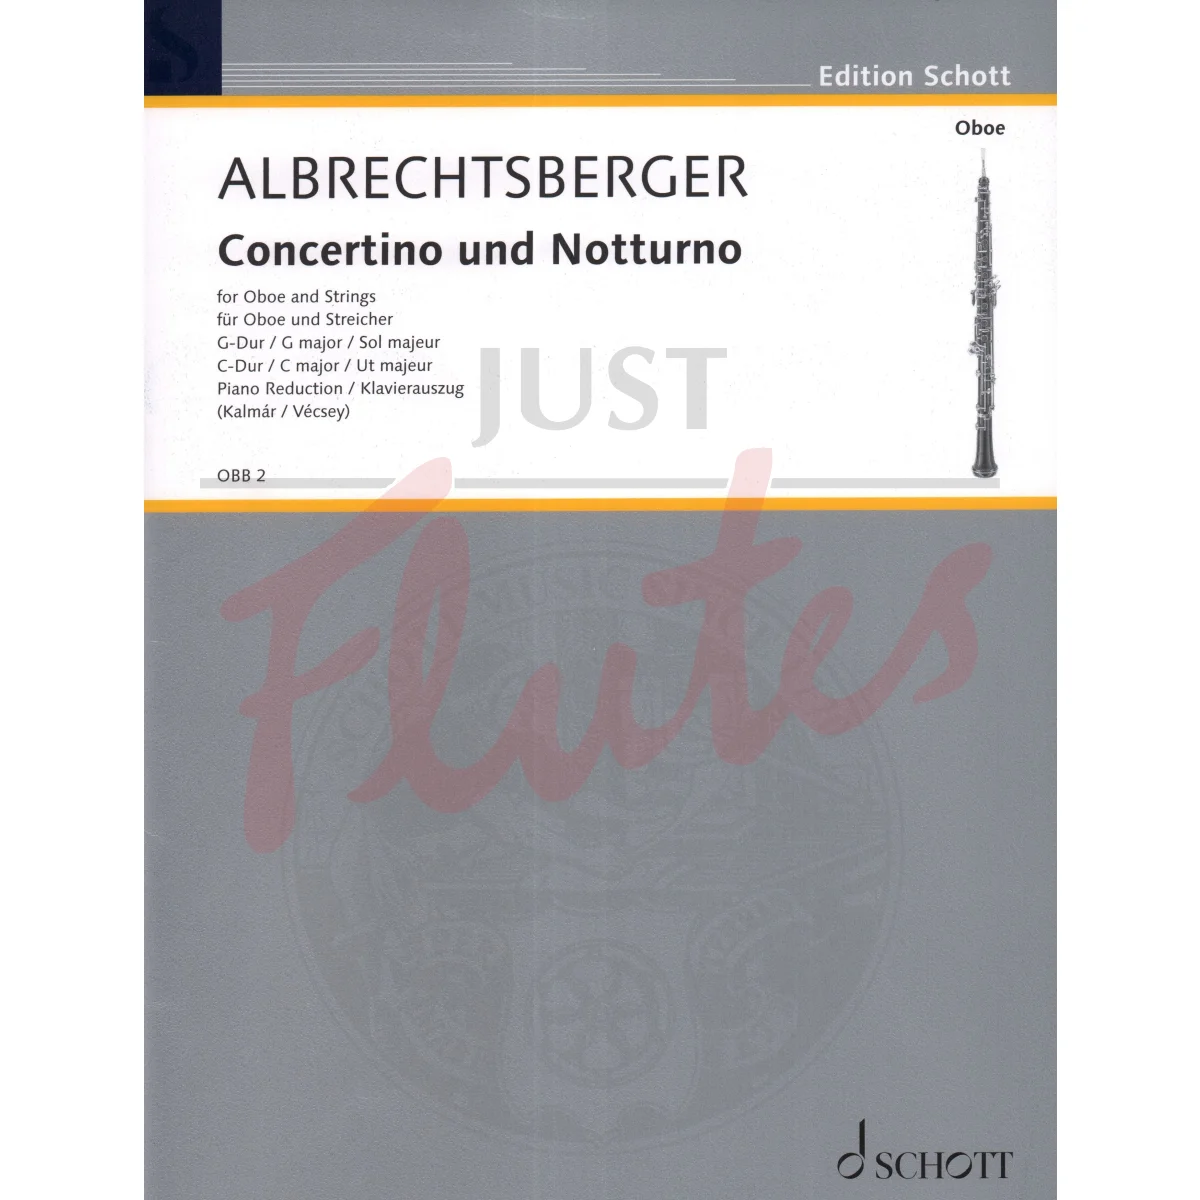 Concertino in G major and Notturno in C major for Oboe and Piano